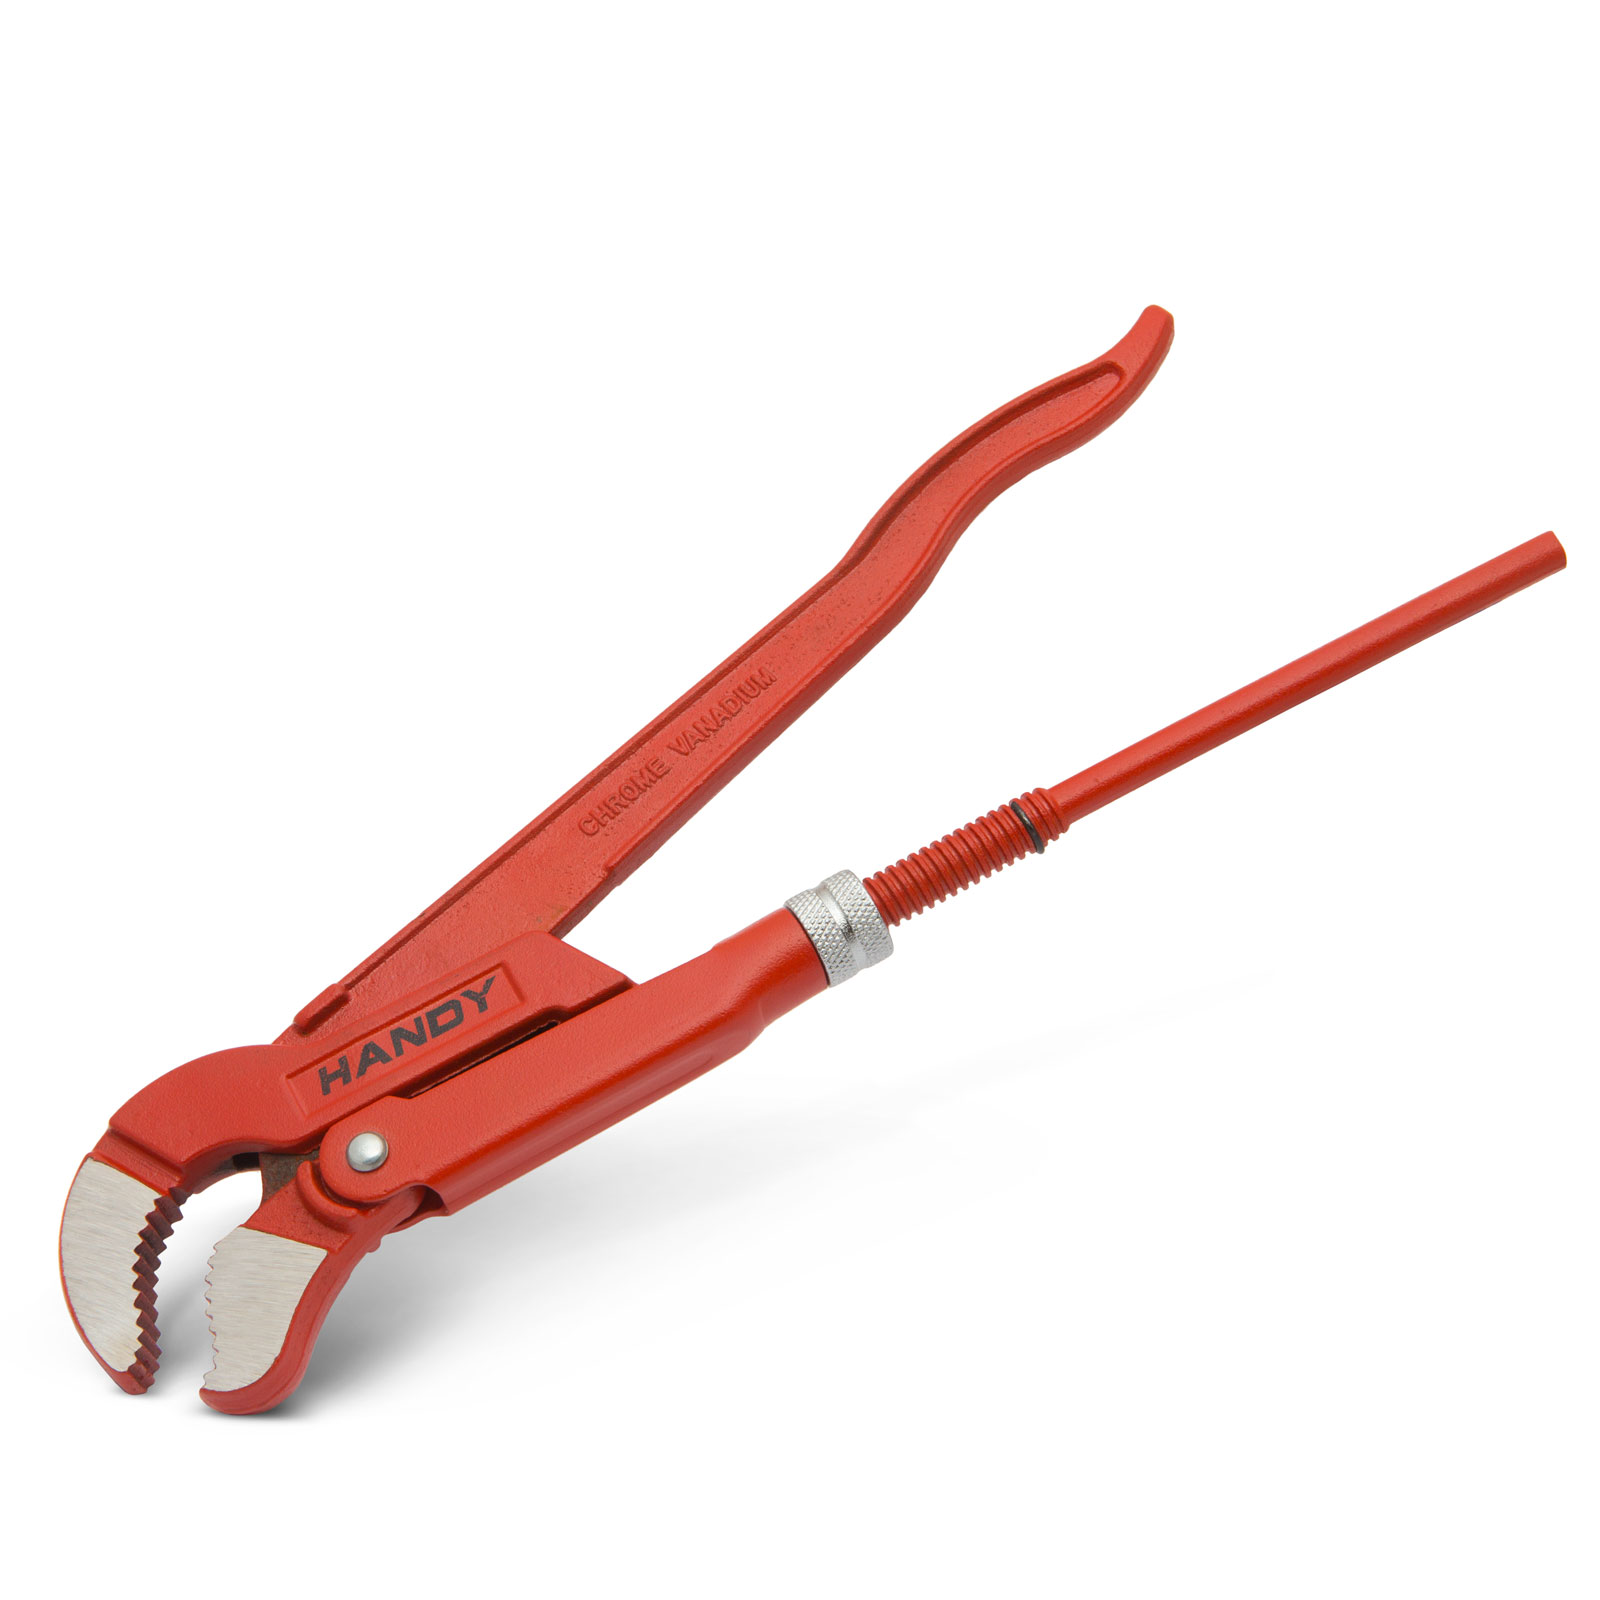 Pipe wrench - 1,5" thumb